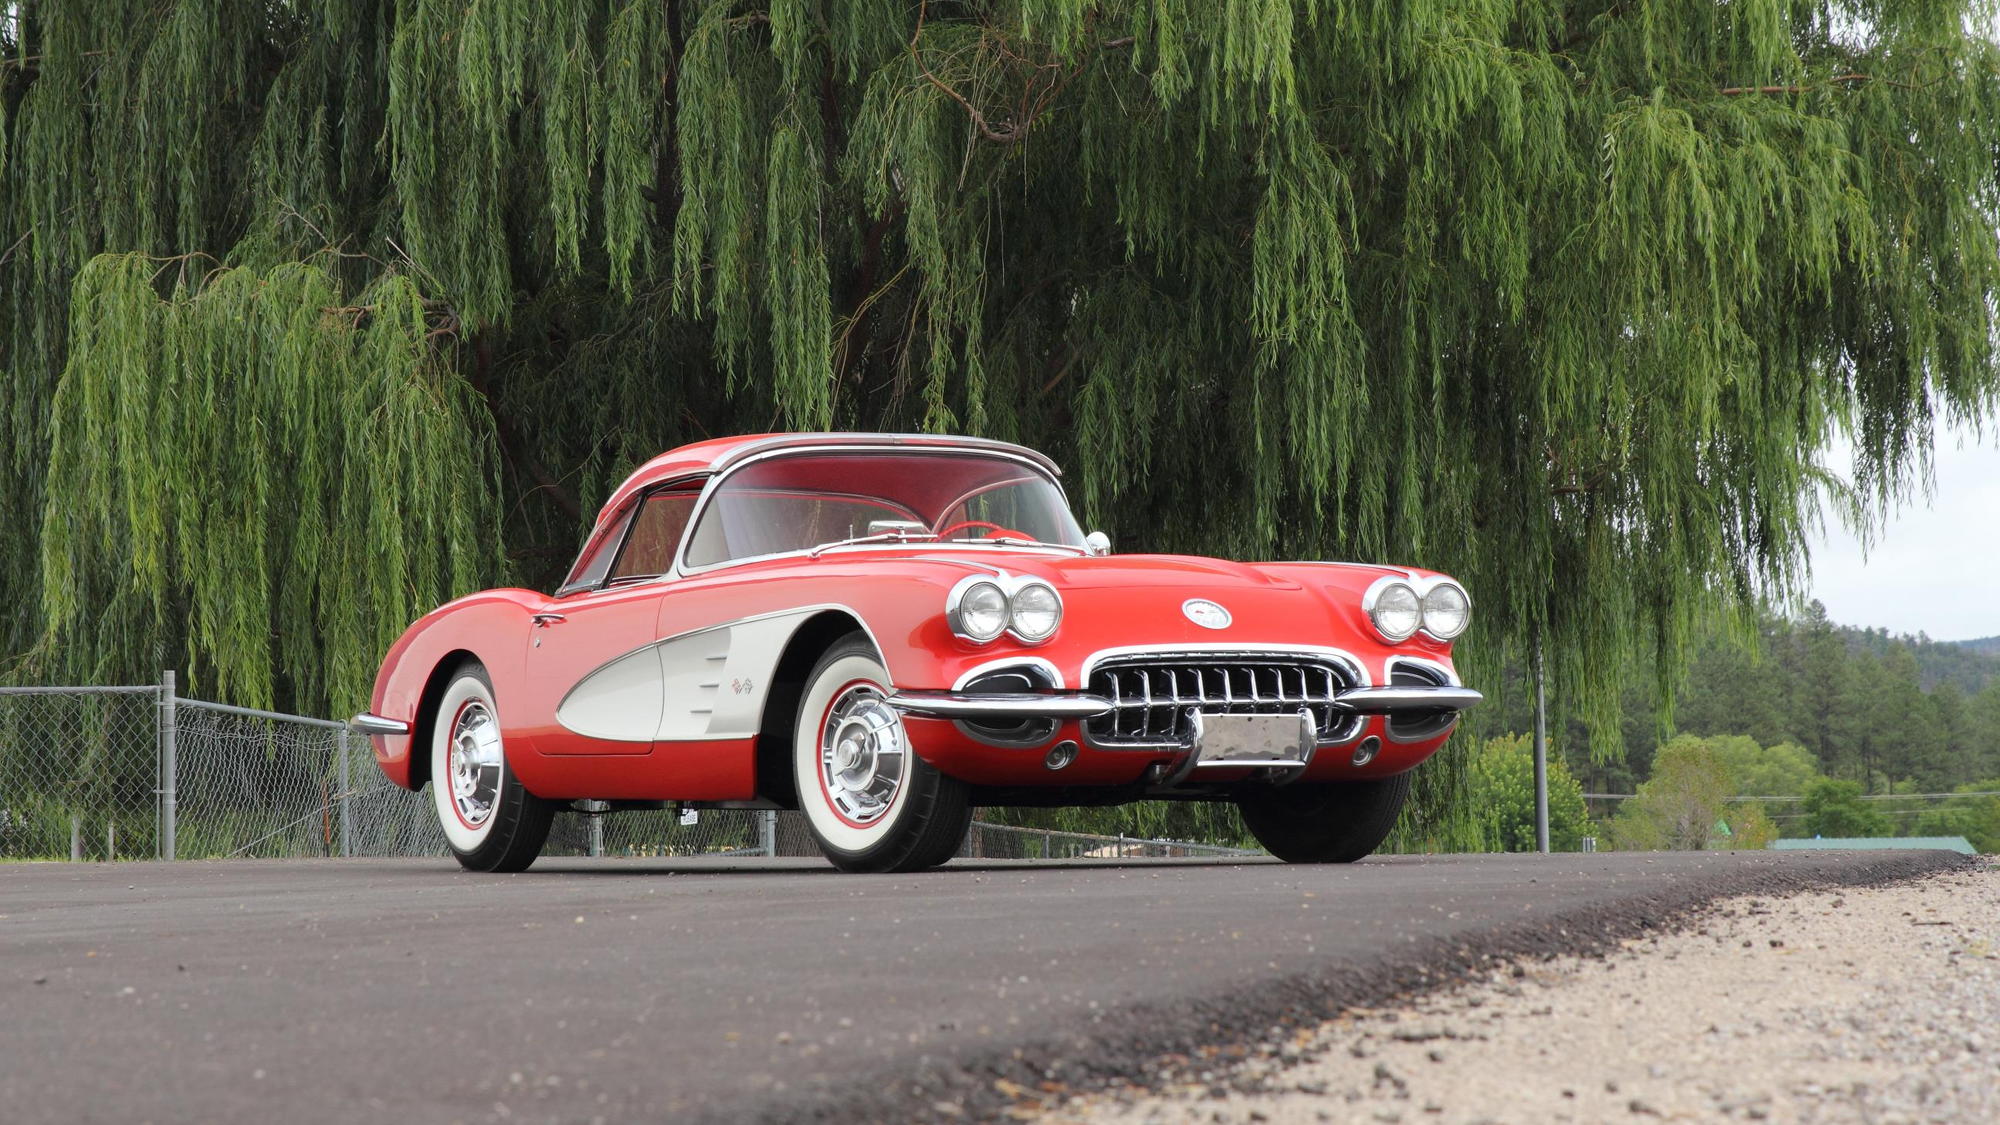 One of the Ron MacWhorter Corvettes auctioned at Mecum in Dallas